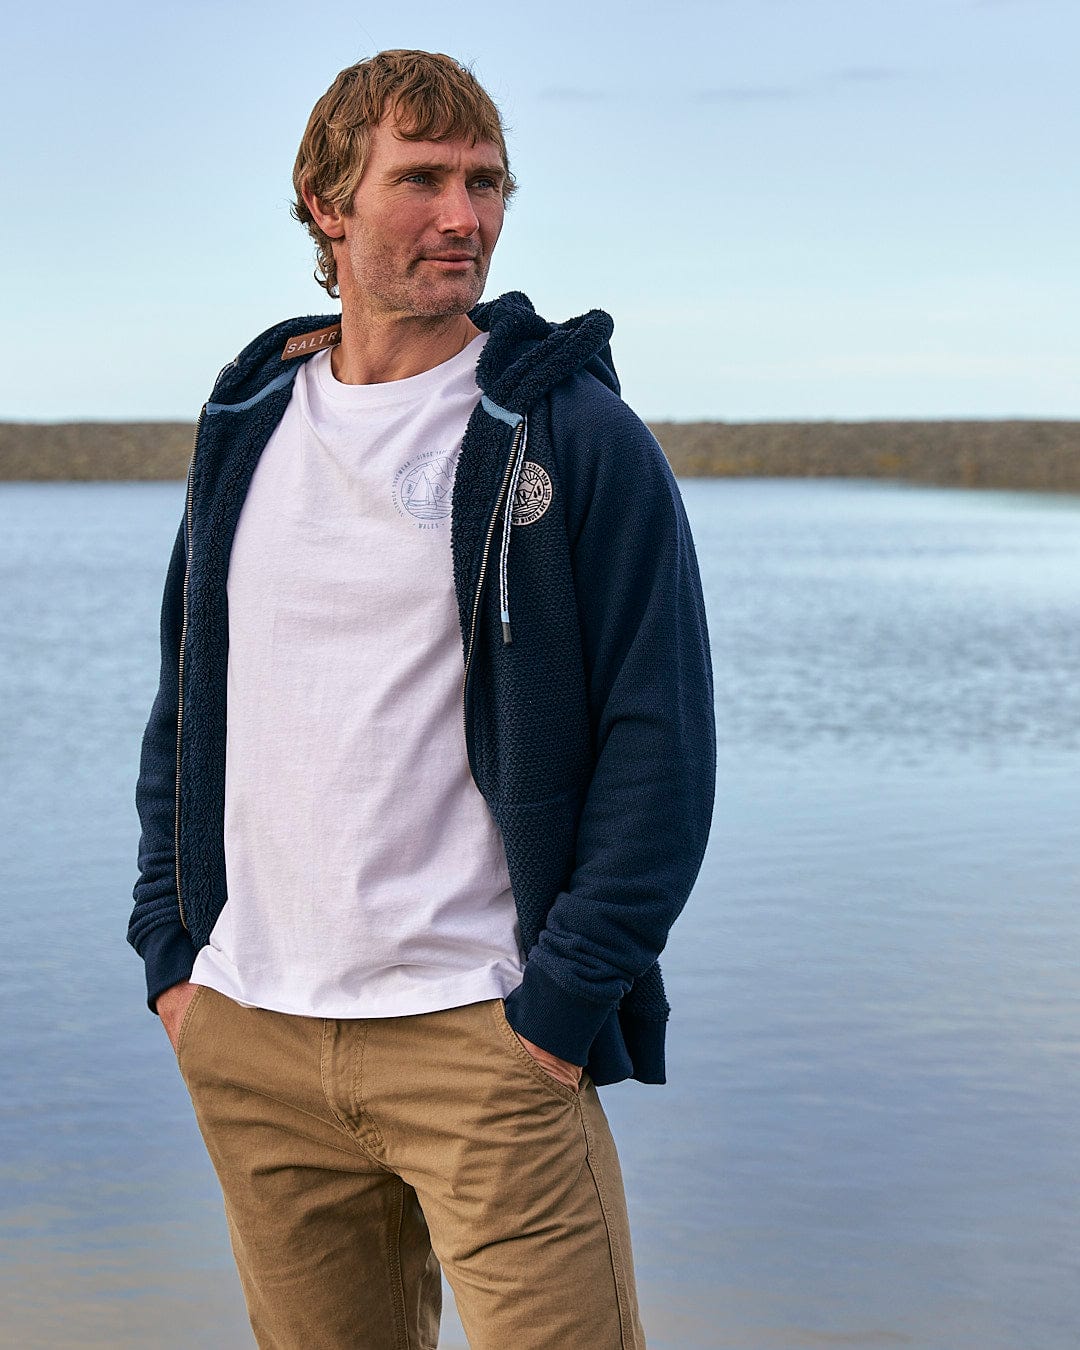 A man standing next to a body of water wearing a Saltrock Hall - Mens Orkney Borg Lined Hoodie - Dark Blue.